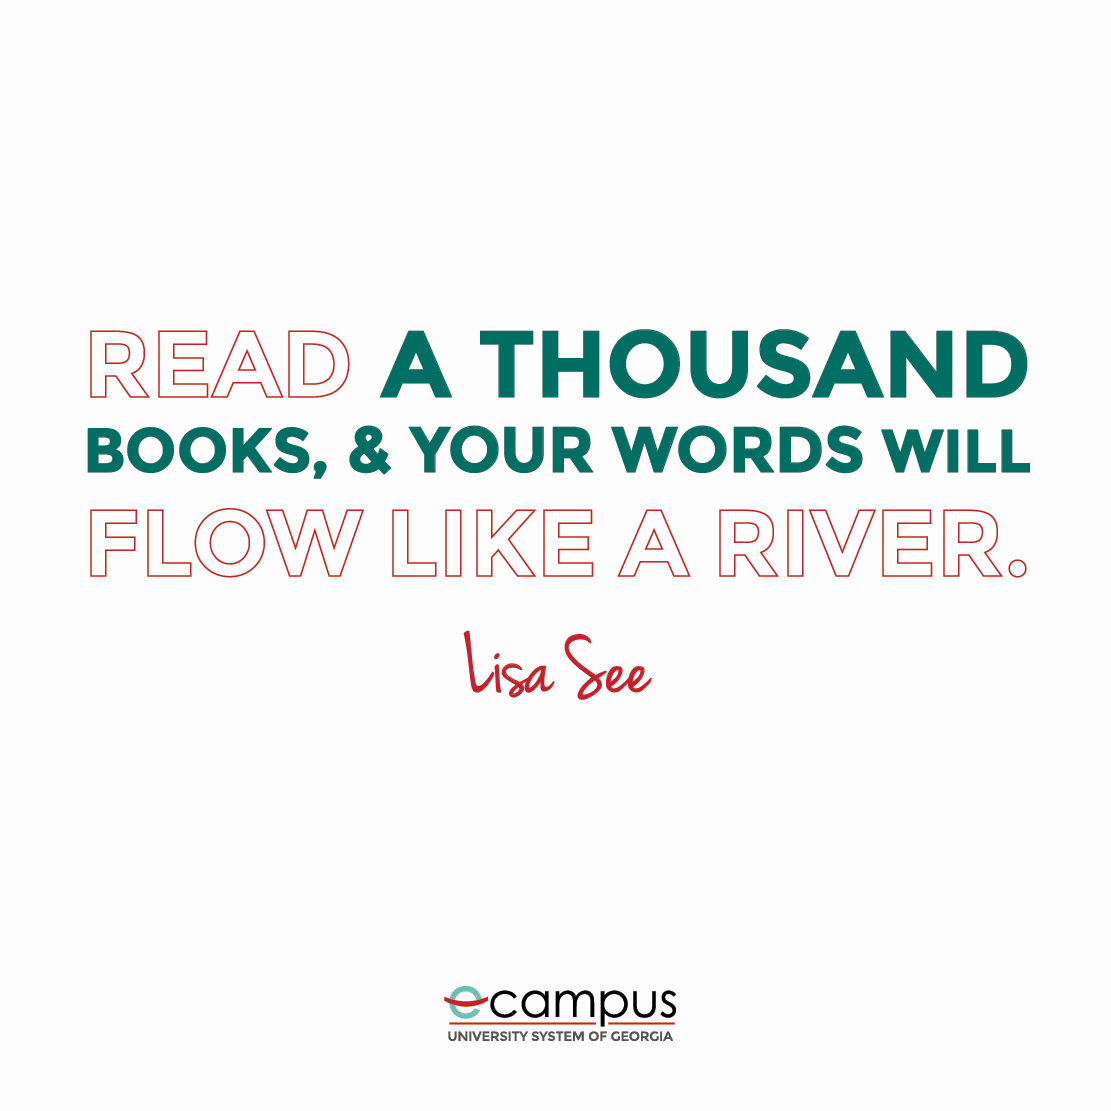 The more you read📚, the more knowledge you'll receive! 

With that said, this is your friendly reminder to keep reading. What books are you currently reading?! 🤔

#AsianAmericanHistoryMonth #WednesdayWisdom #WordsofWisdom #eMajor #OnlineCollegeDegrees #OnlineDegrees #USGeCampus